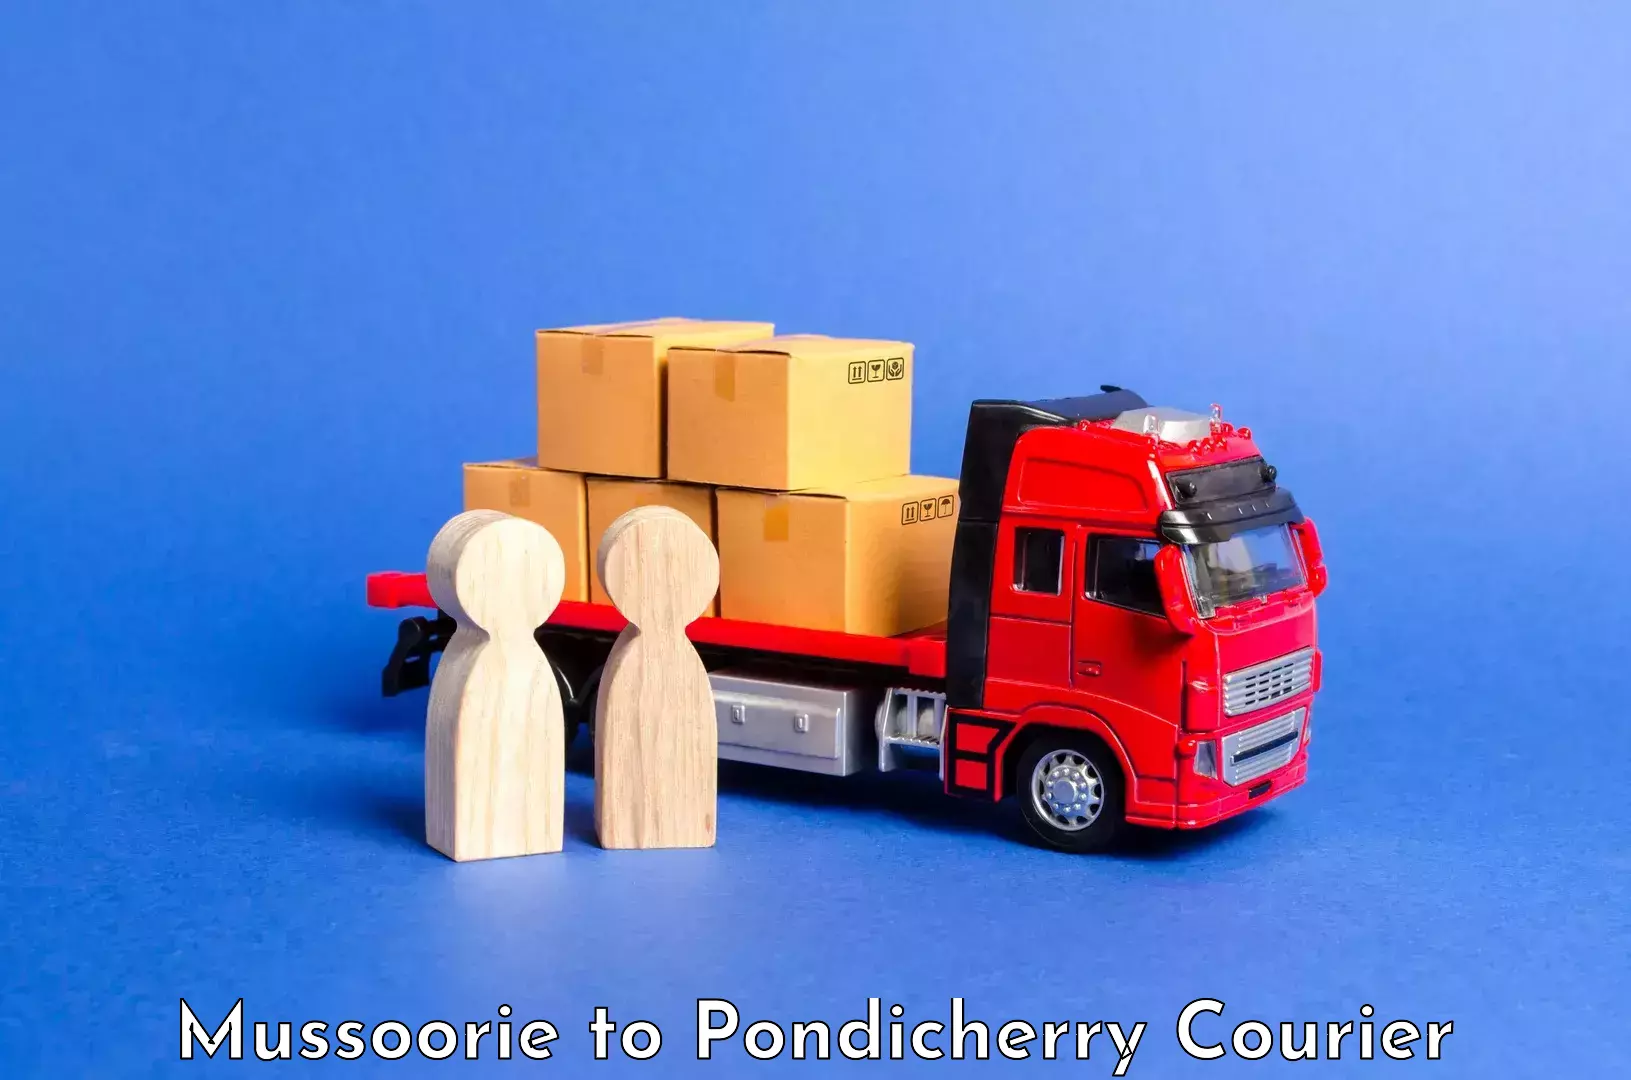 Luggage delivery network Mussoorie to Pondicherry University